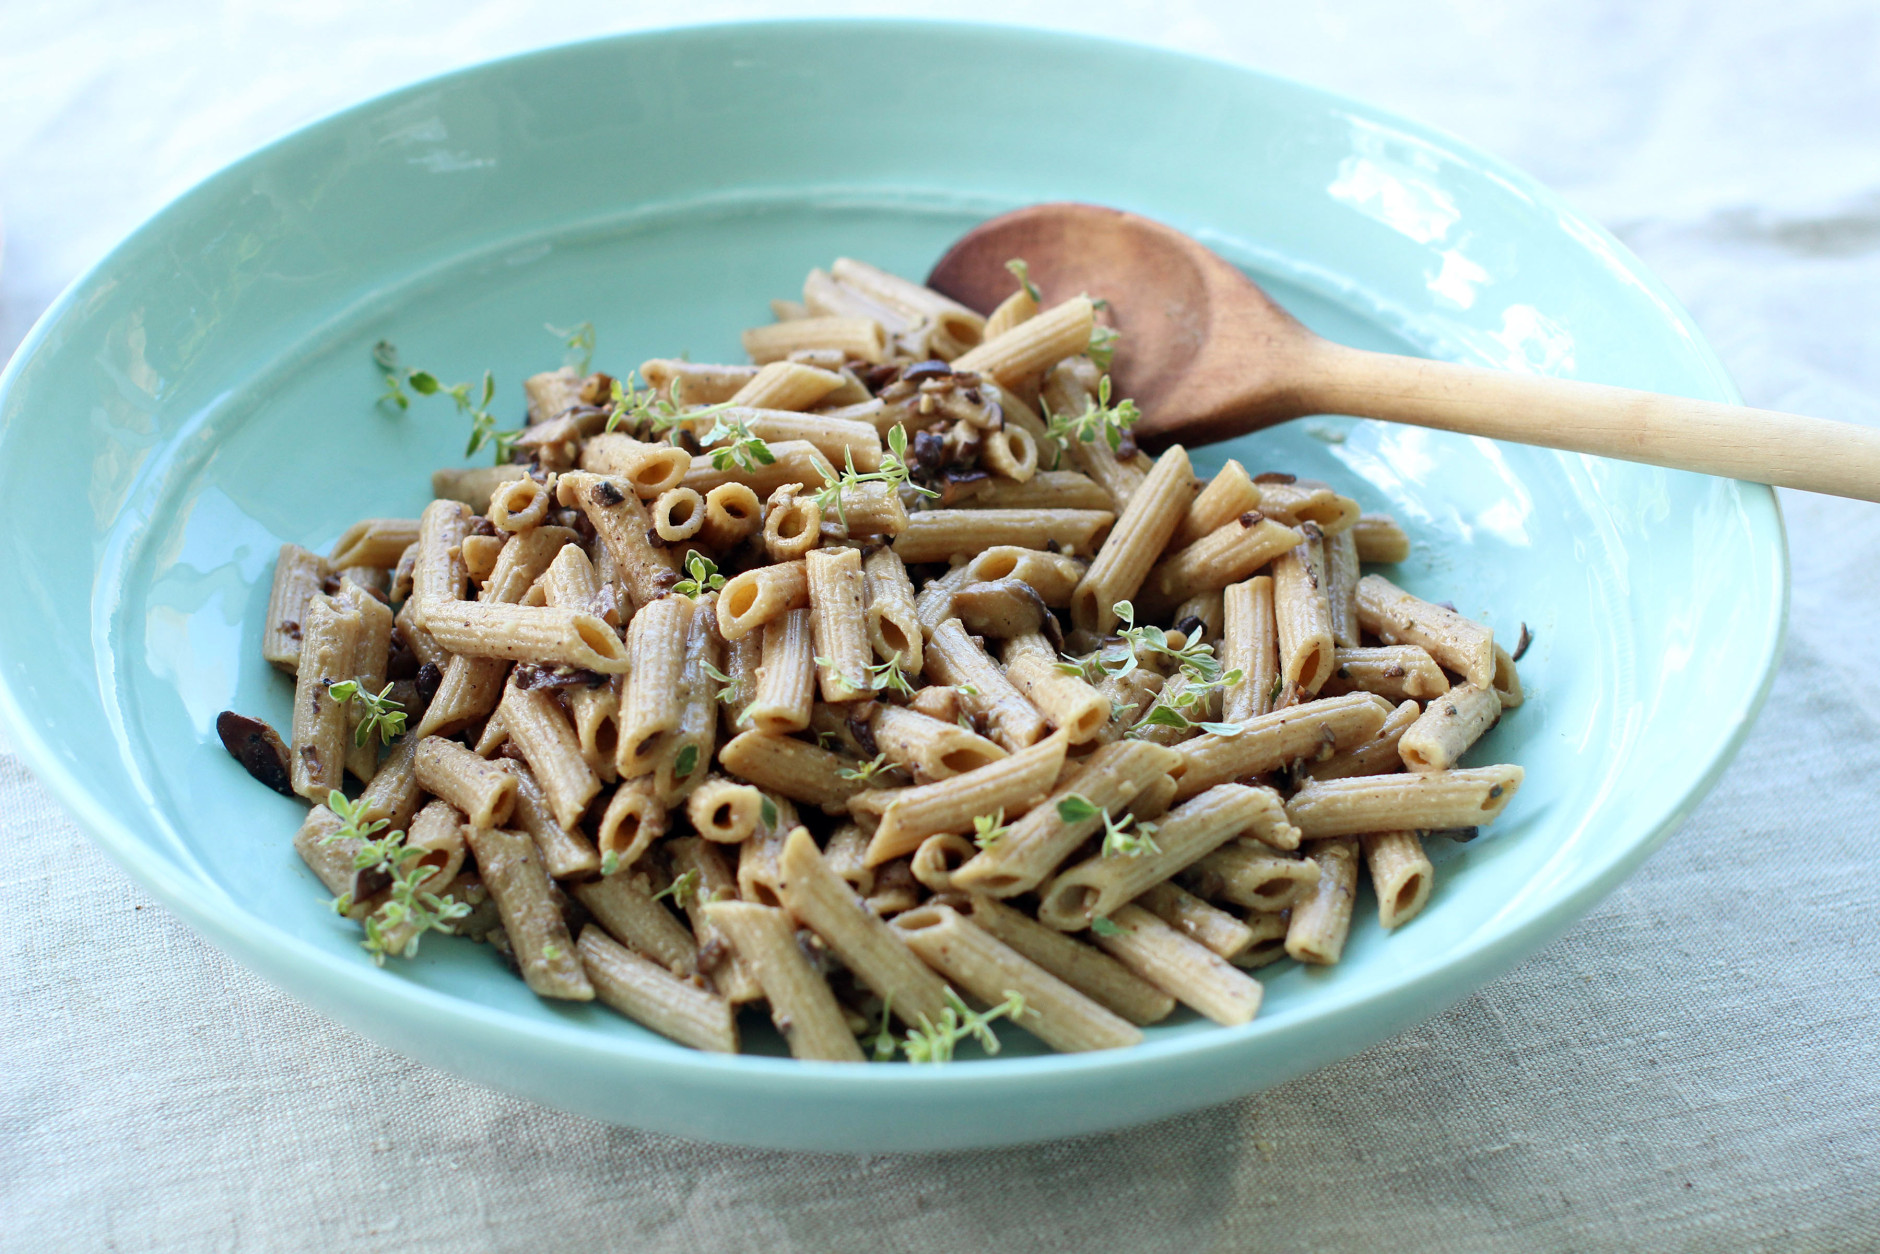 This July 20, 2015 photo shows mushroom miso pasta in Concord, N.H. This recipe tastes far richer, creamier and more sinful than it actually is. (AP Photo/Matthew Mead)